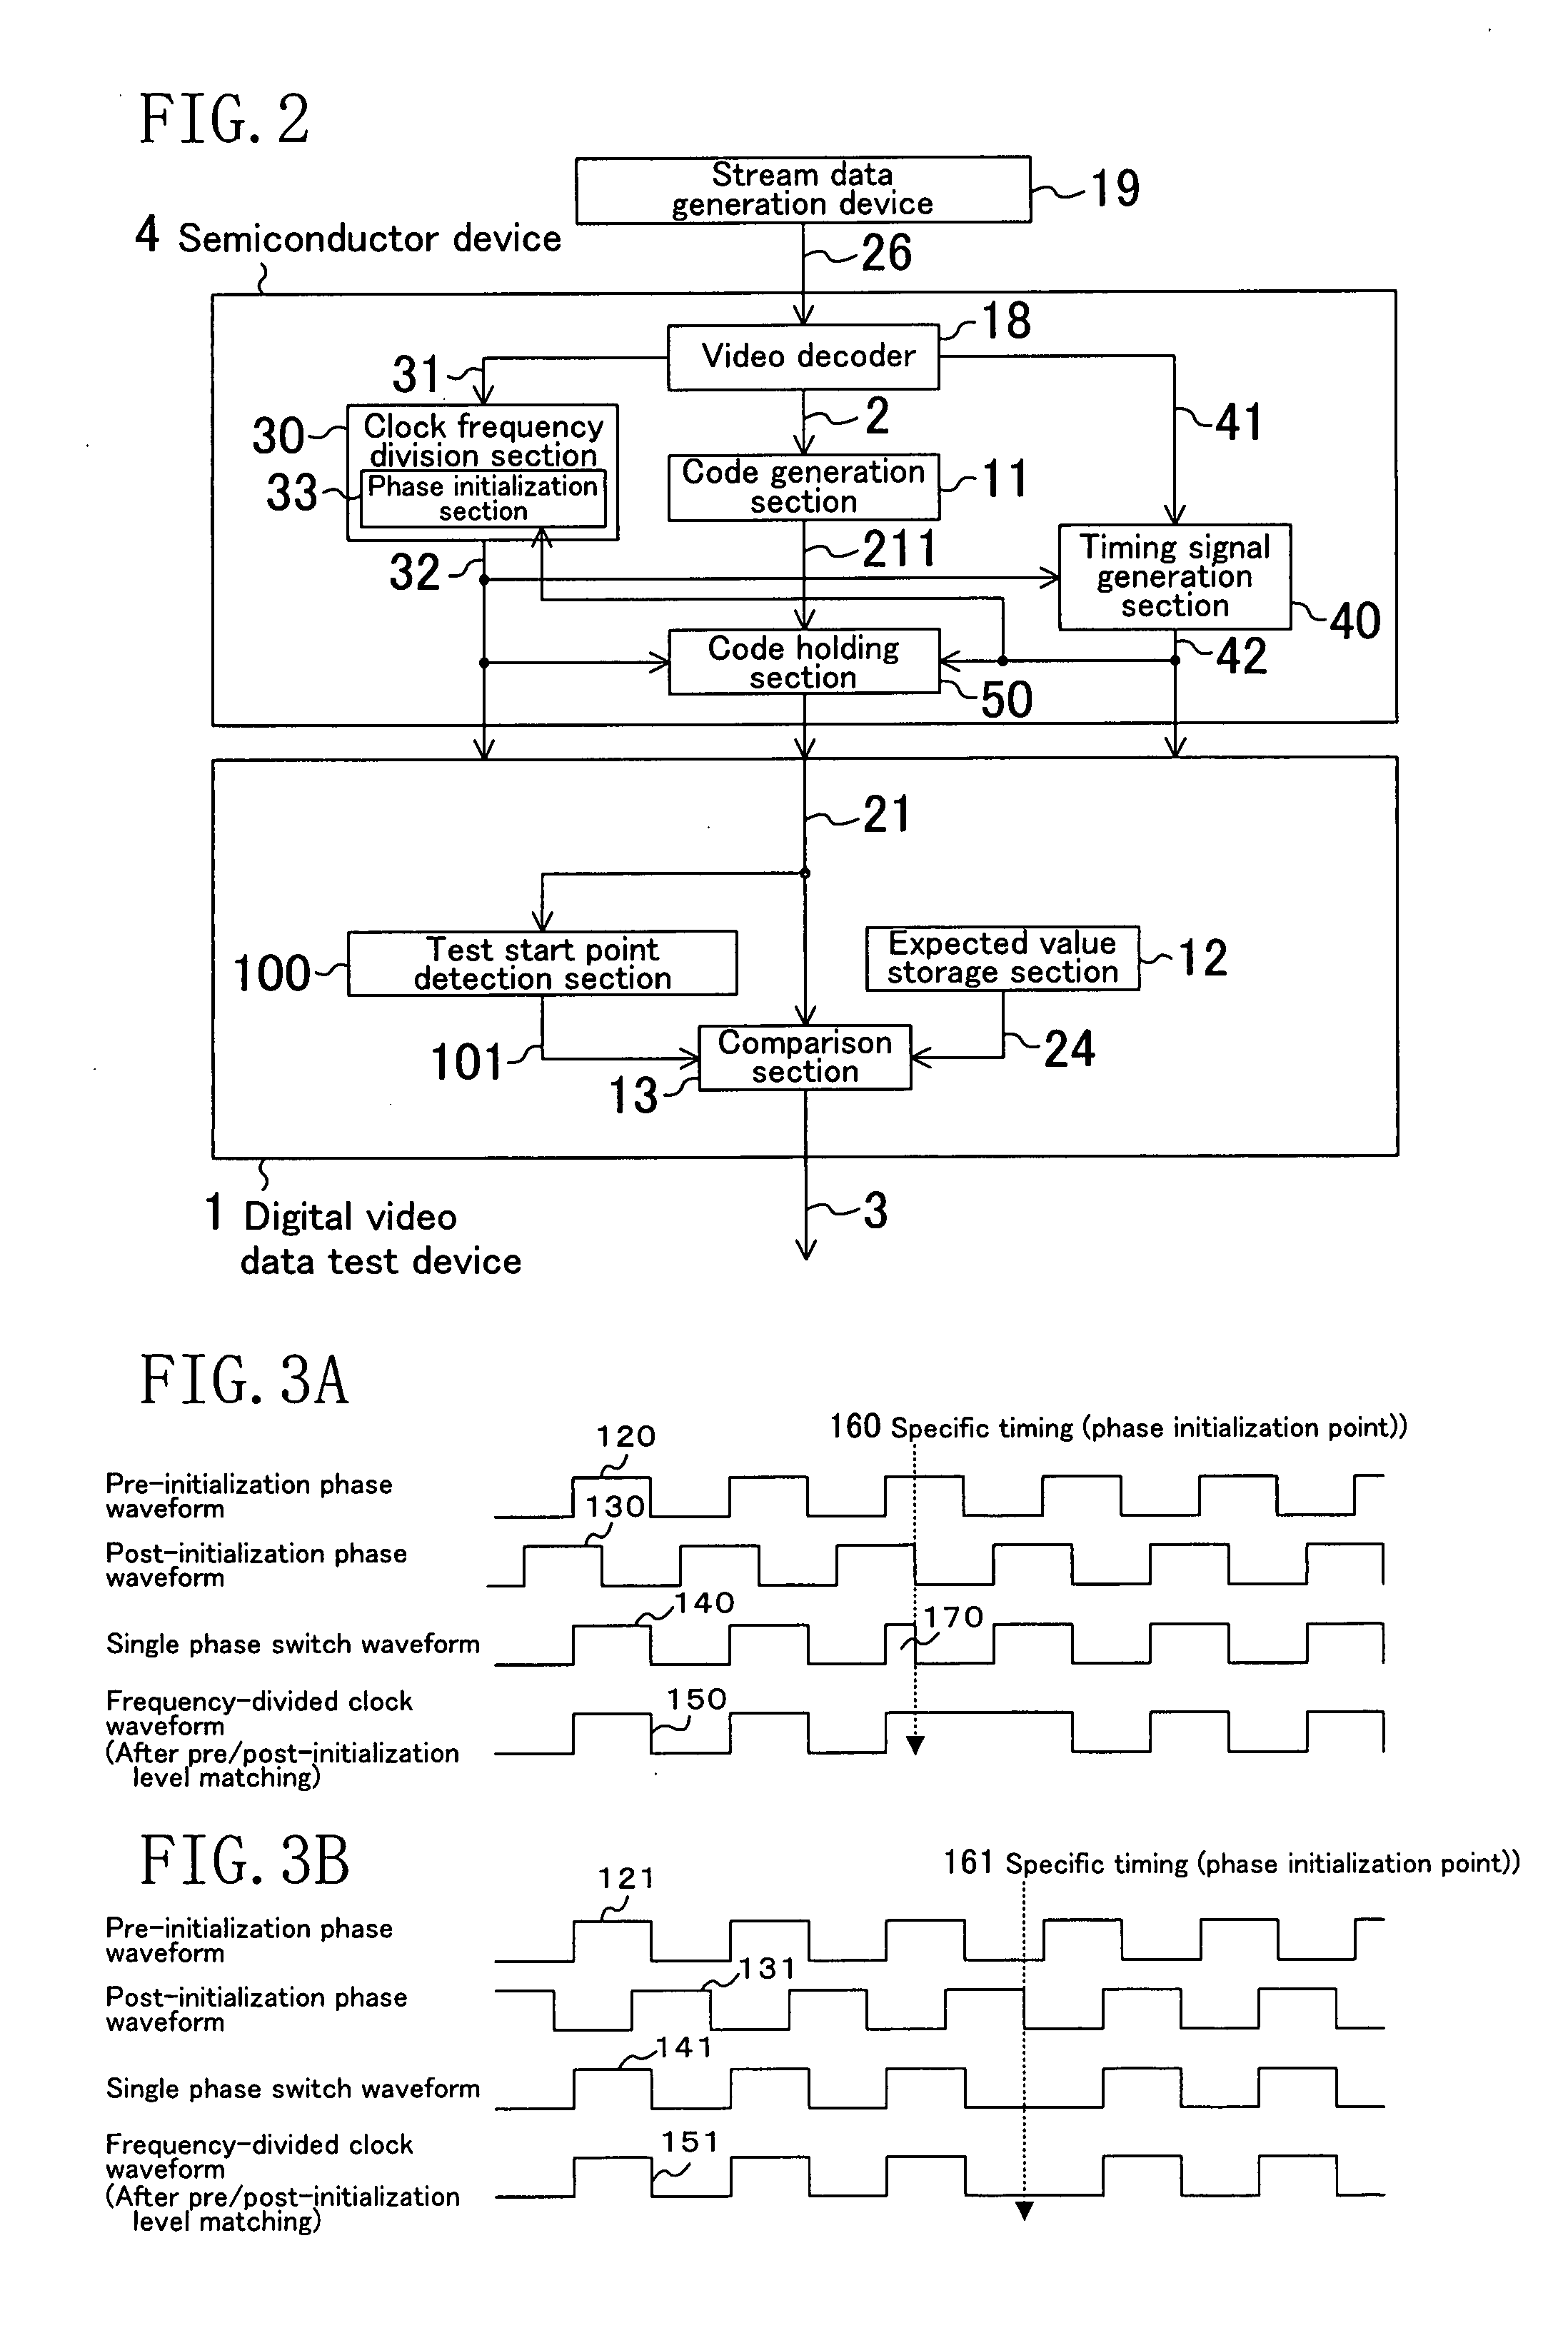 Test system of digital video data and semiconductor device